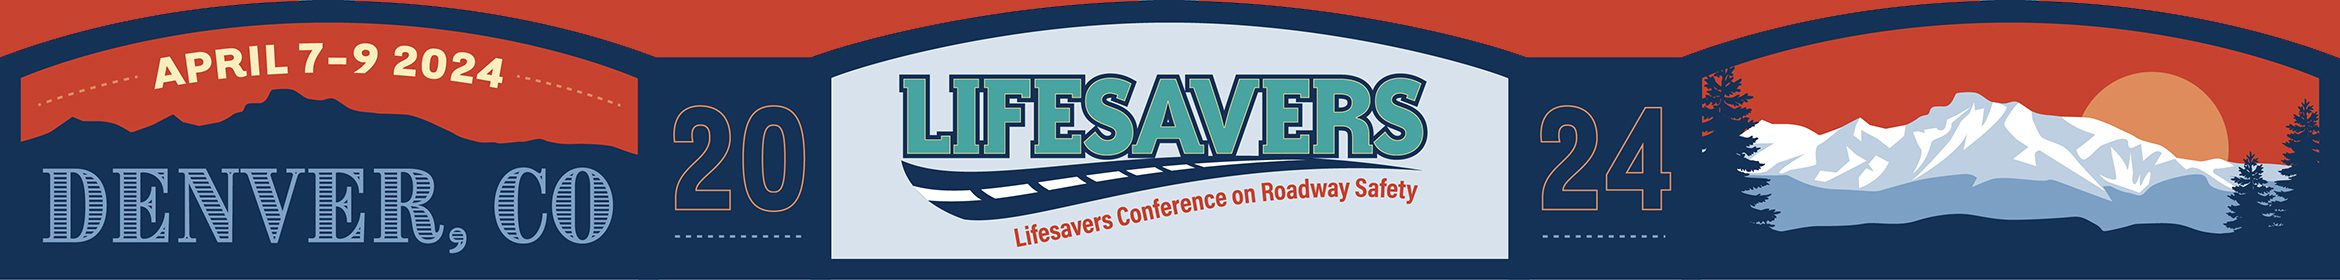 2024 Lifesavers Conference on Roadway Safety, to be held April 7-9, 2024 at the Colorado Convention Center in Denver, CO.